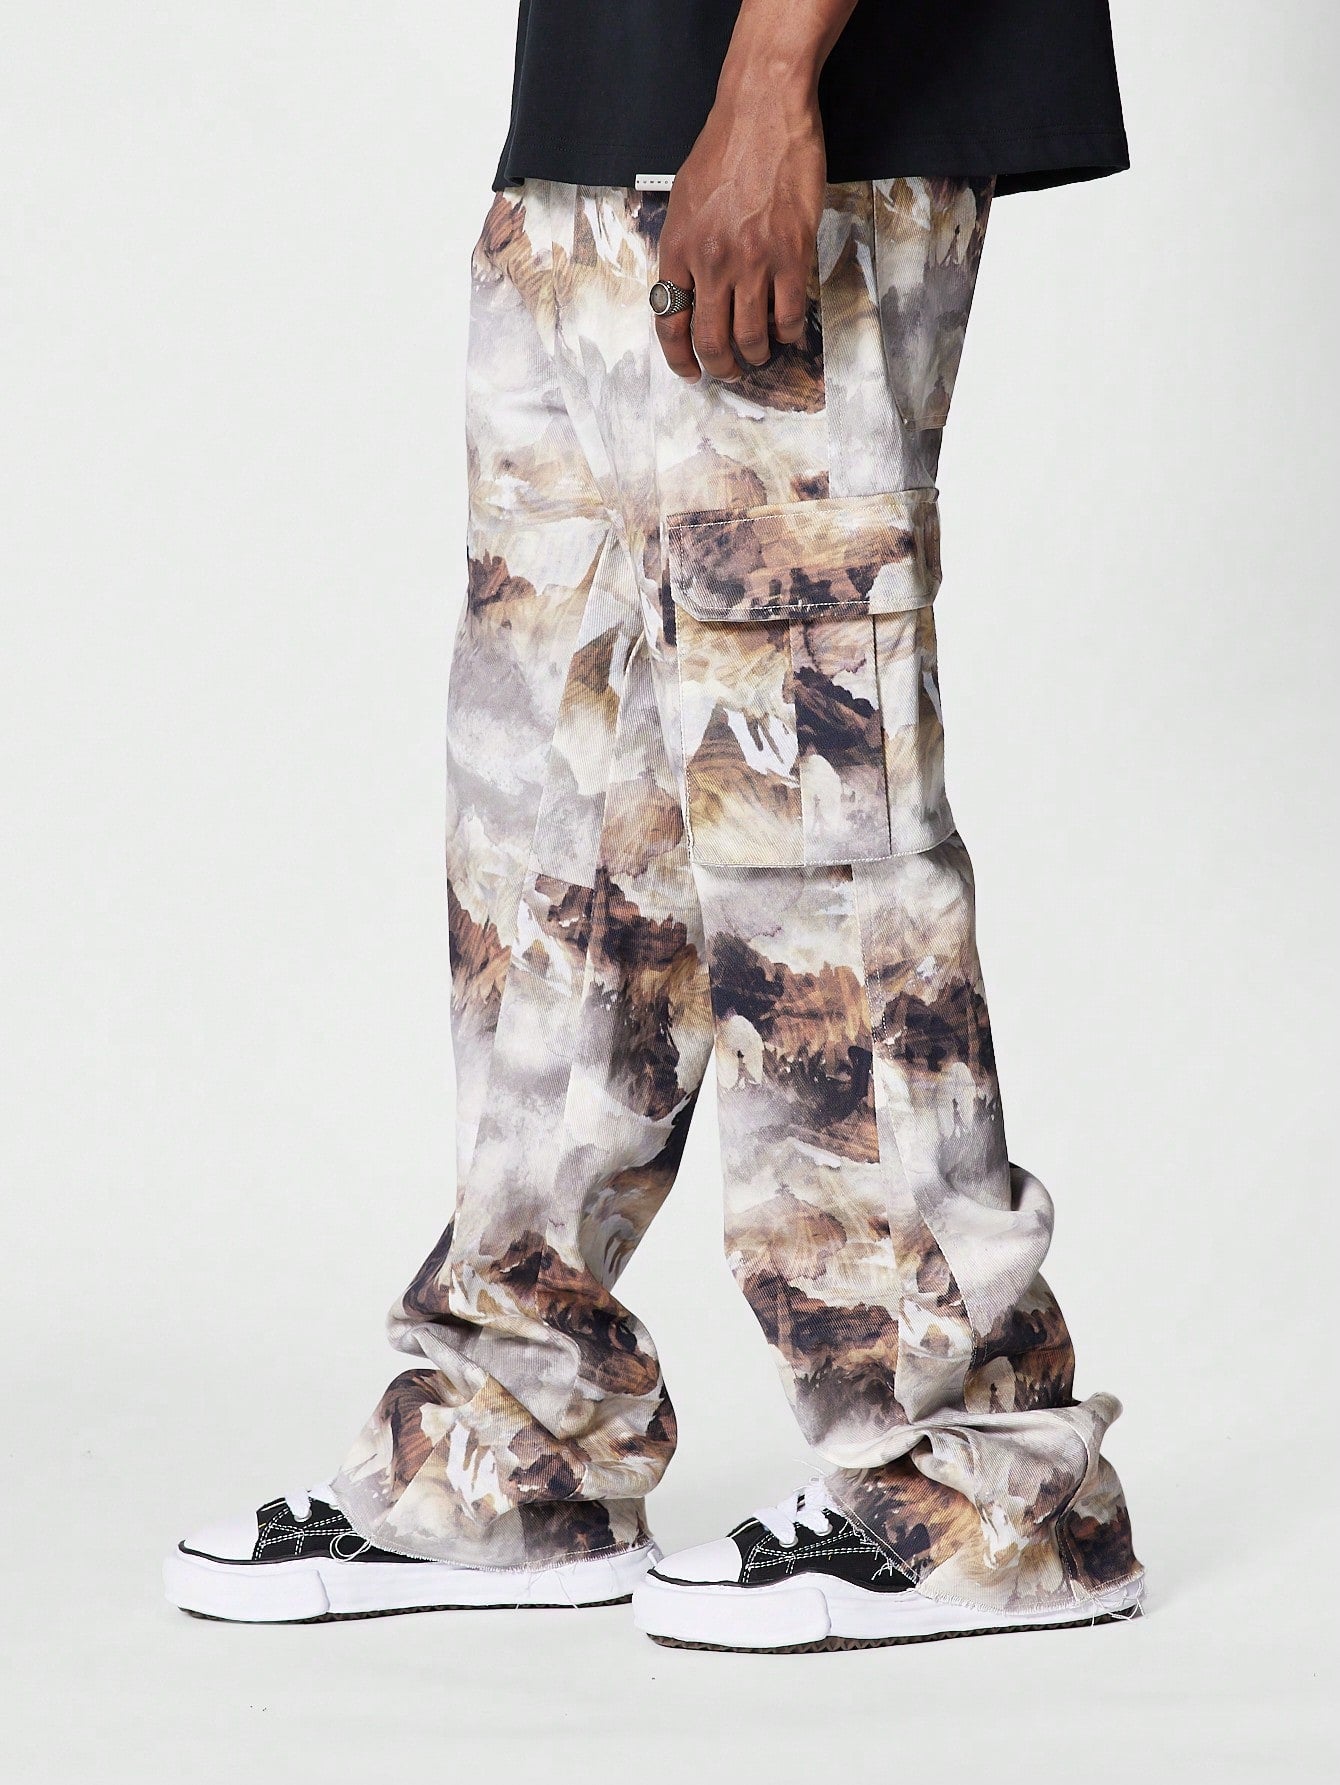 All-Over Pockets Cargo Pants